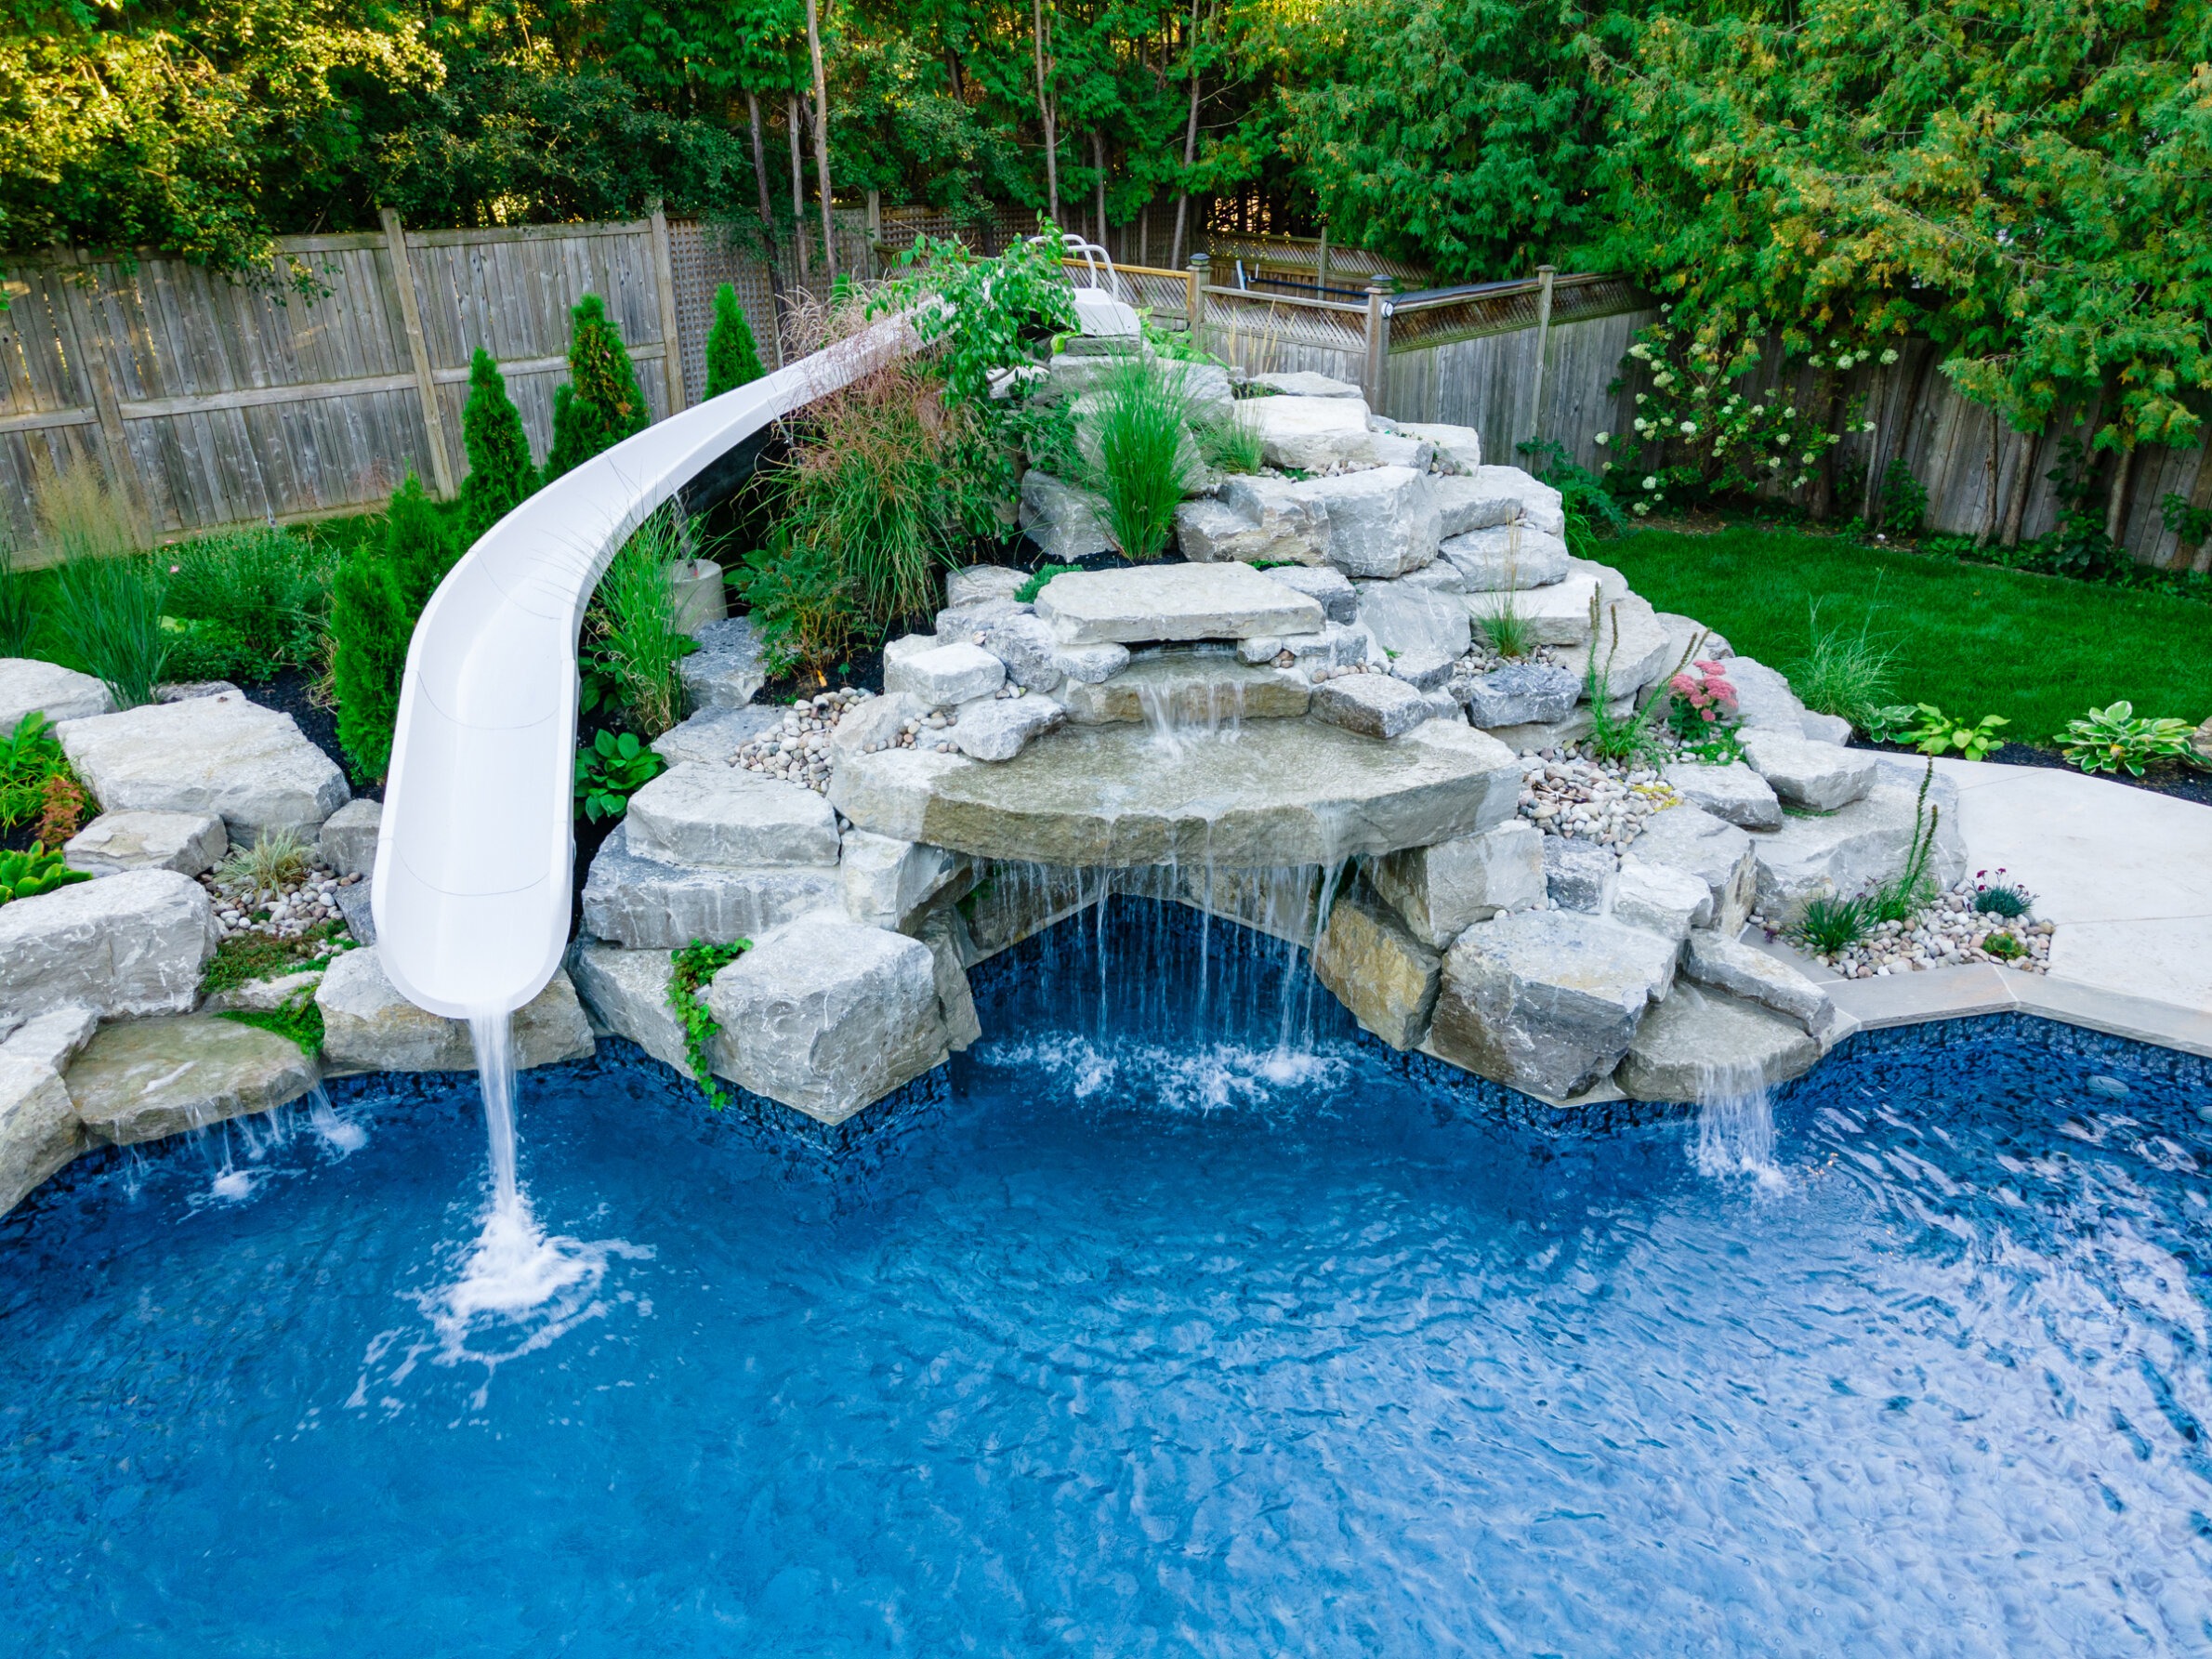 An outdoor pool with a white slide and a rock waterfall feature surrounded by a landscaped garden, lawn, and a wooden fence.